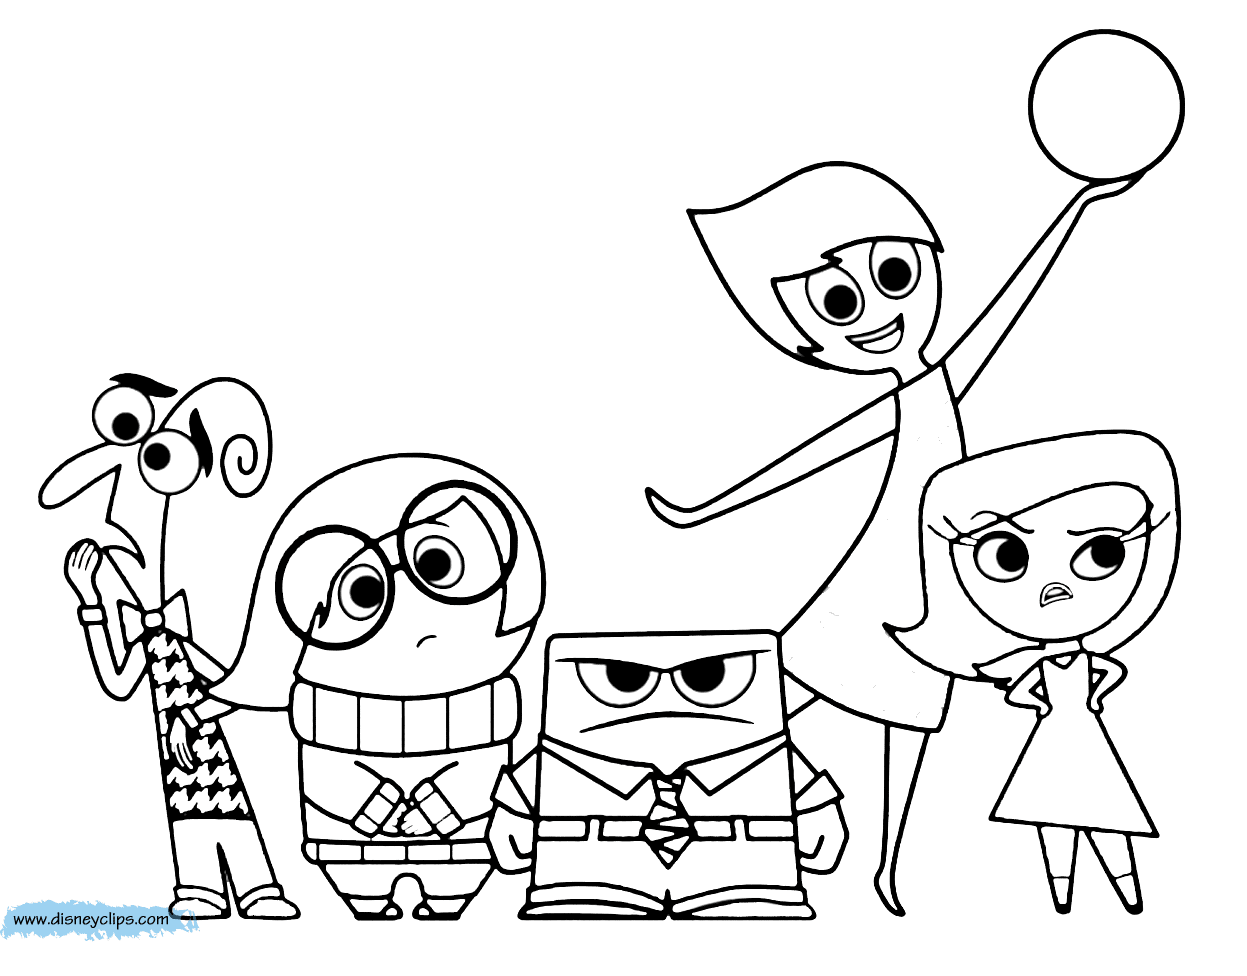 Download Inside Out Coloring Pages | Disneyclips.com